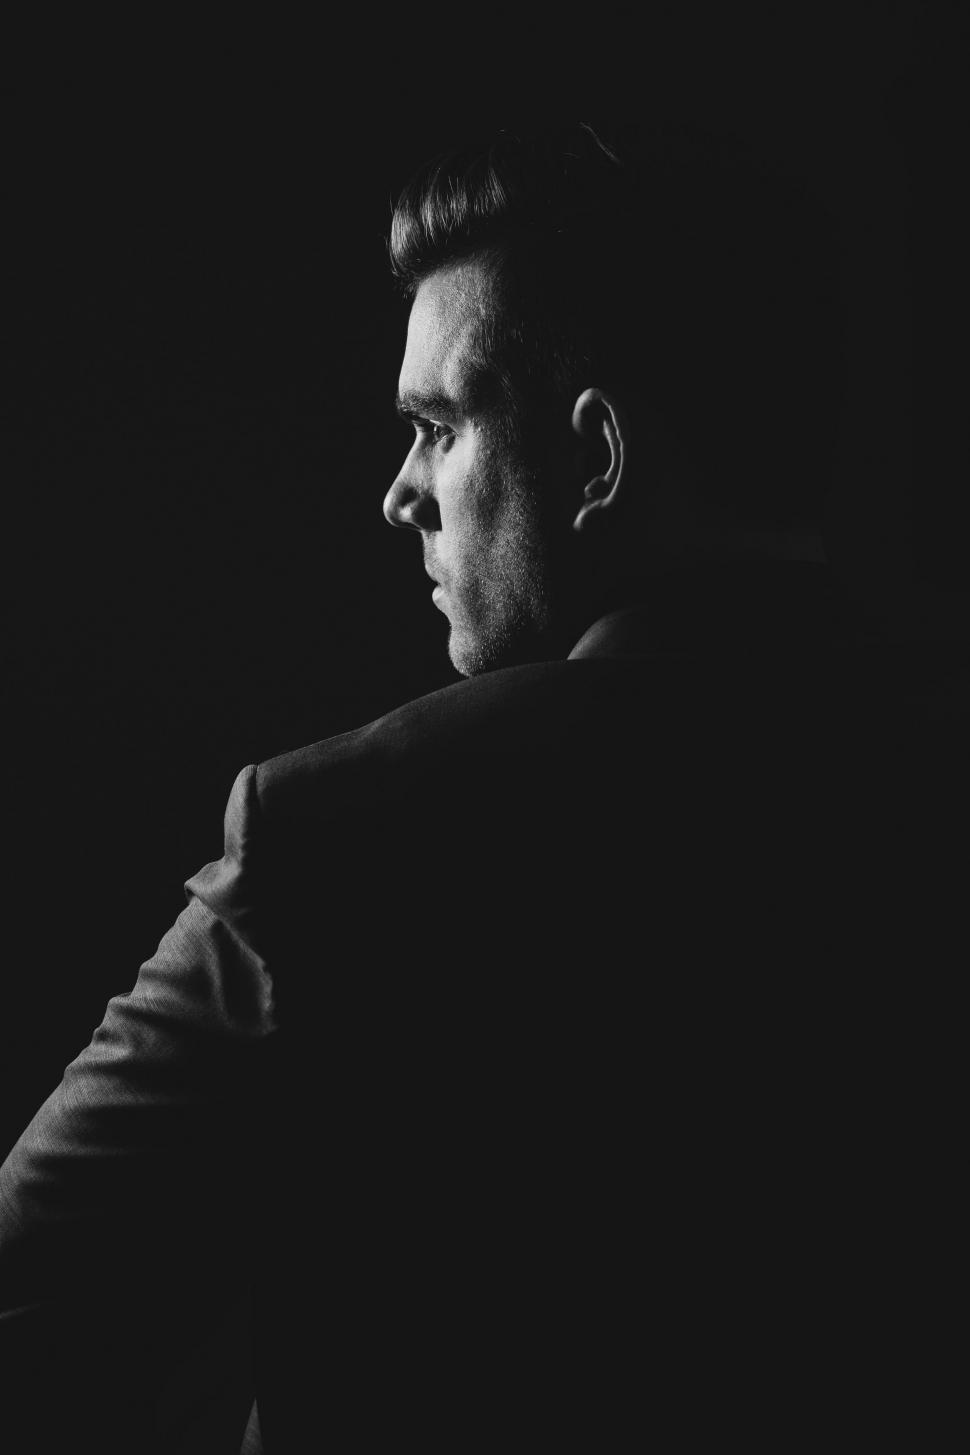 Free Image of A Man in a Suit Standing in Black and White 